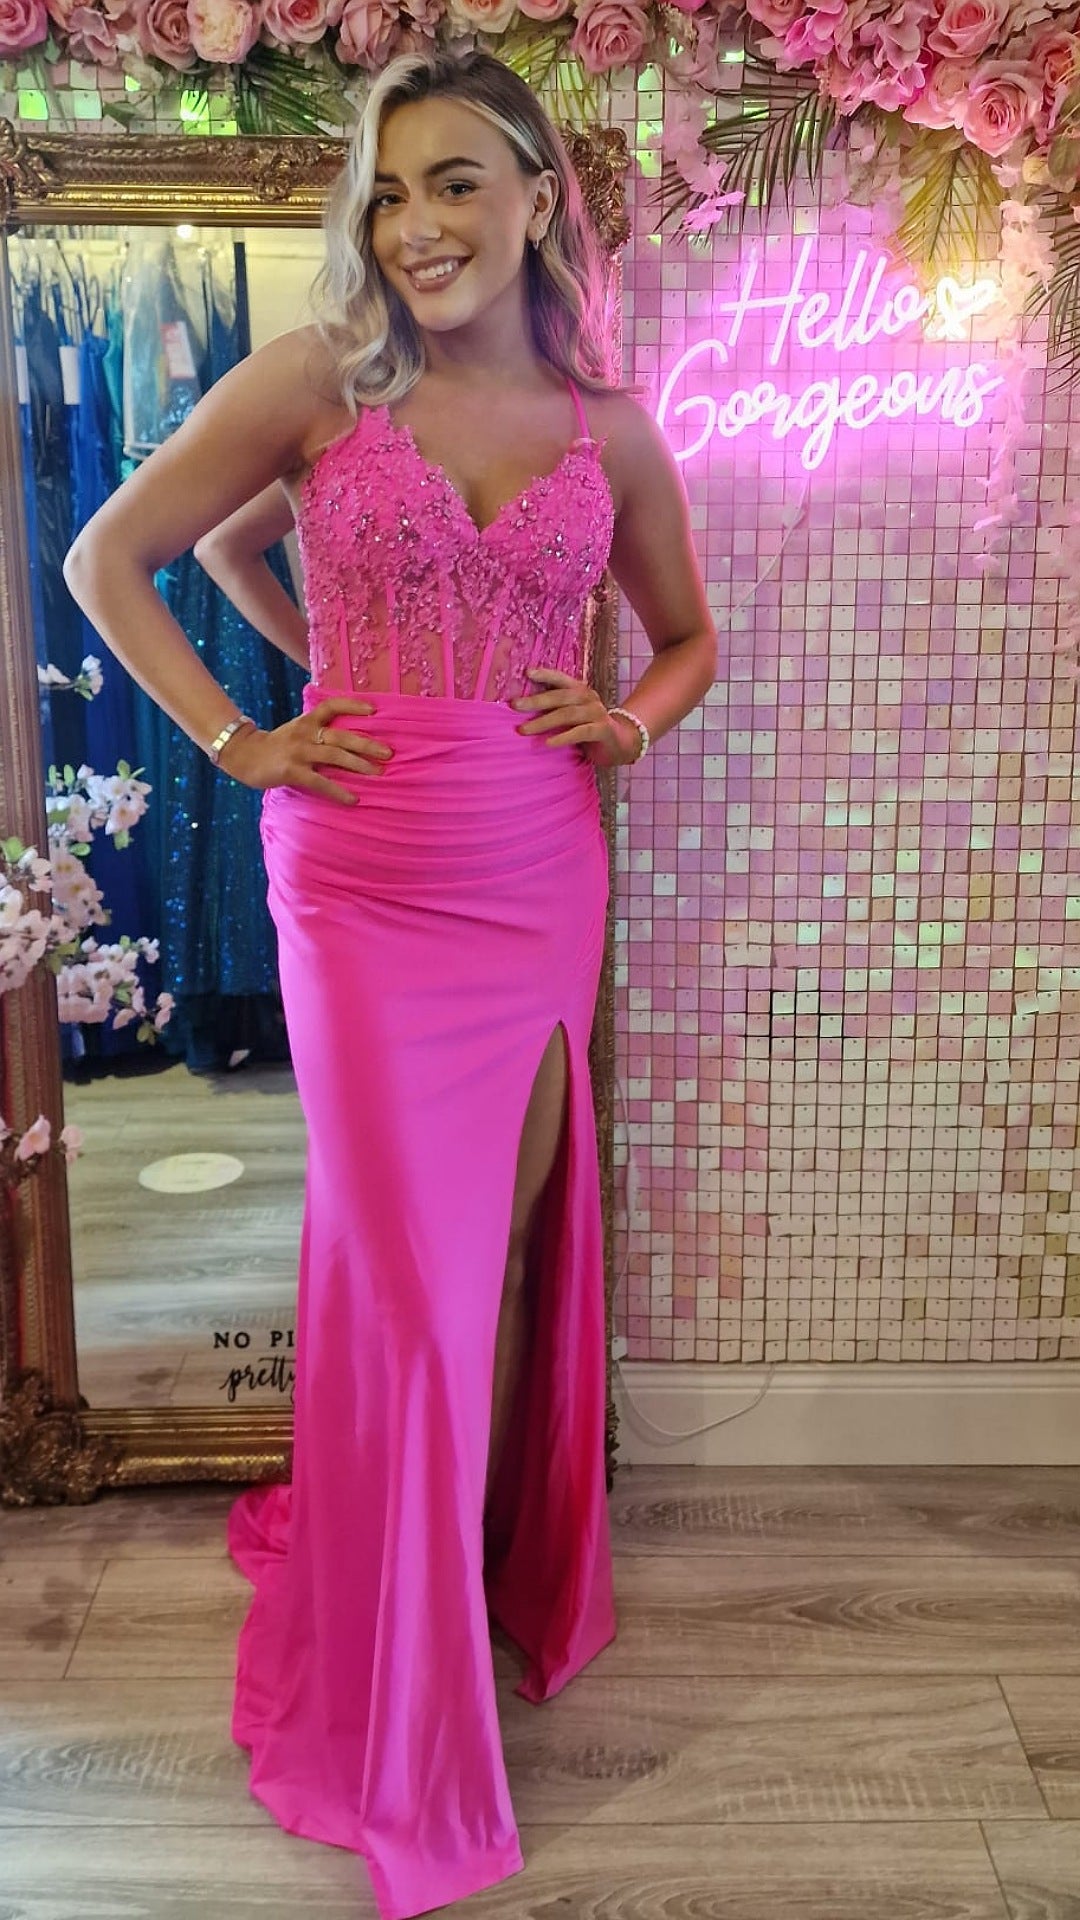 Jill Hot Pink Laced Bodice With Laced Back Leg Split Formal Prom Dress